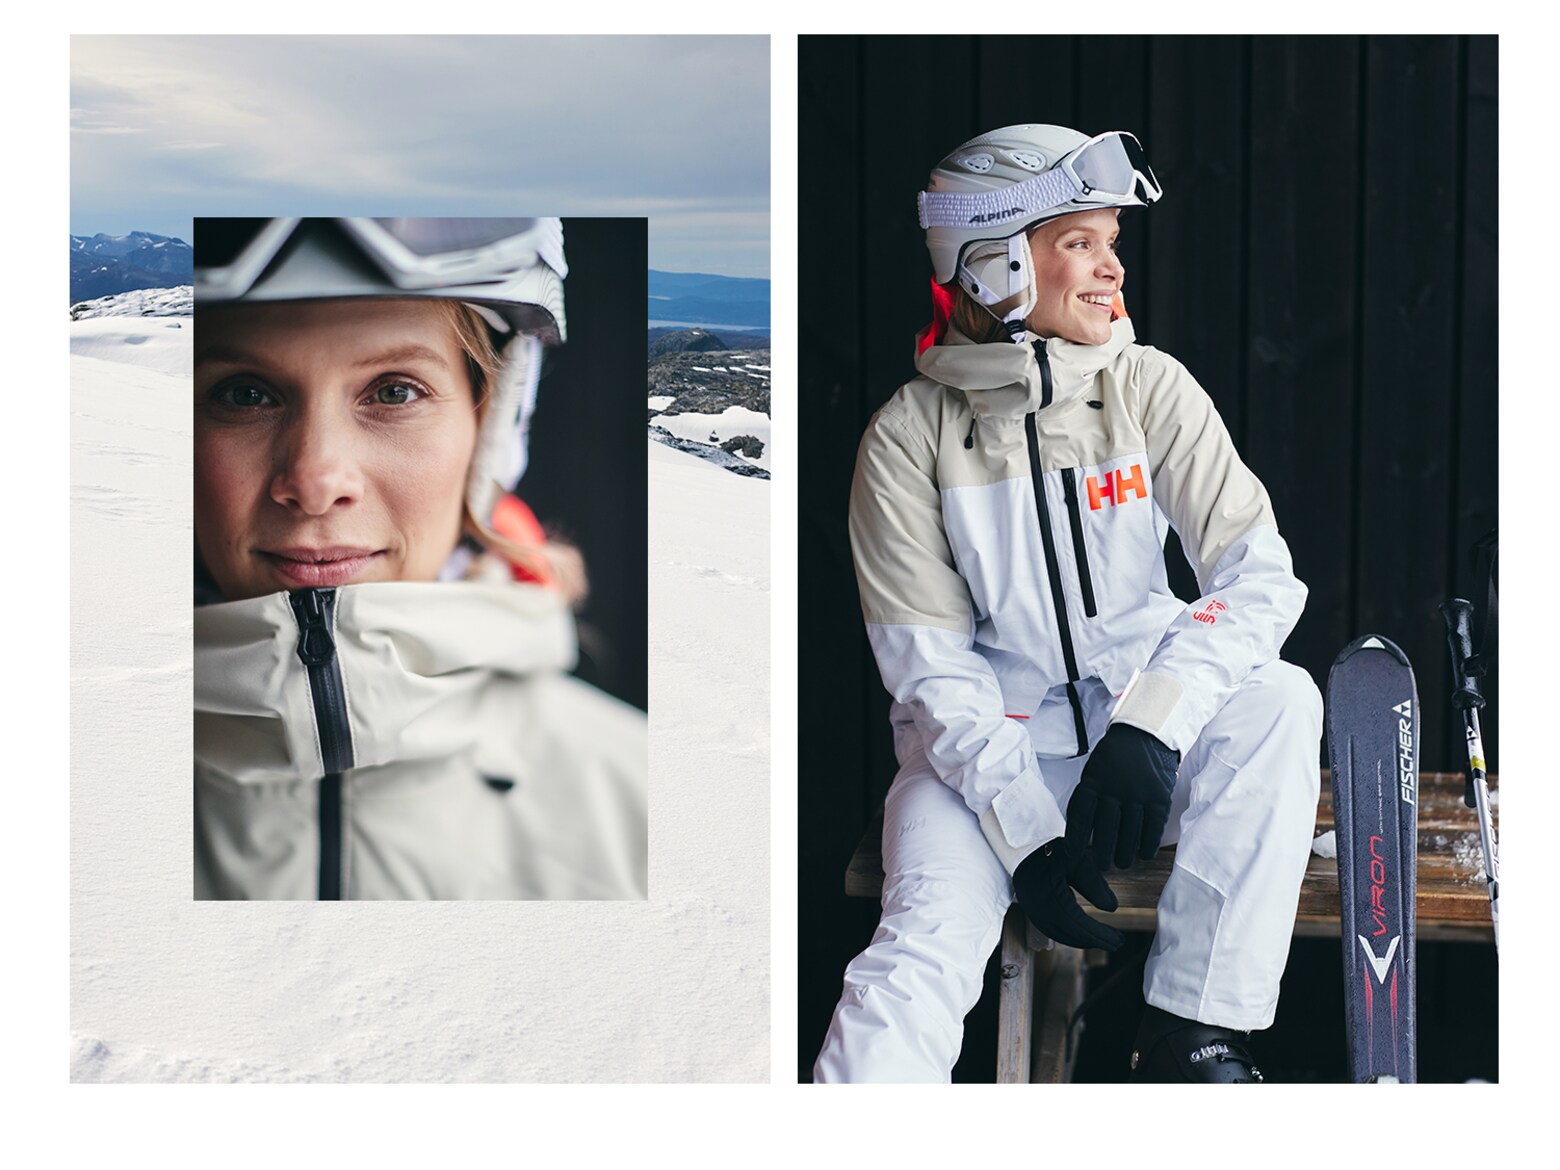 Much more than just an add-on Ski Accessoires